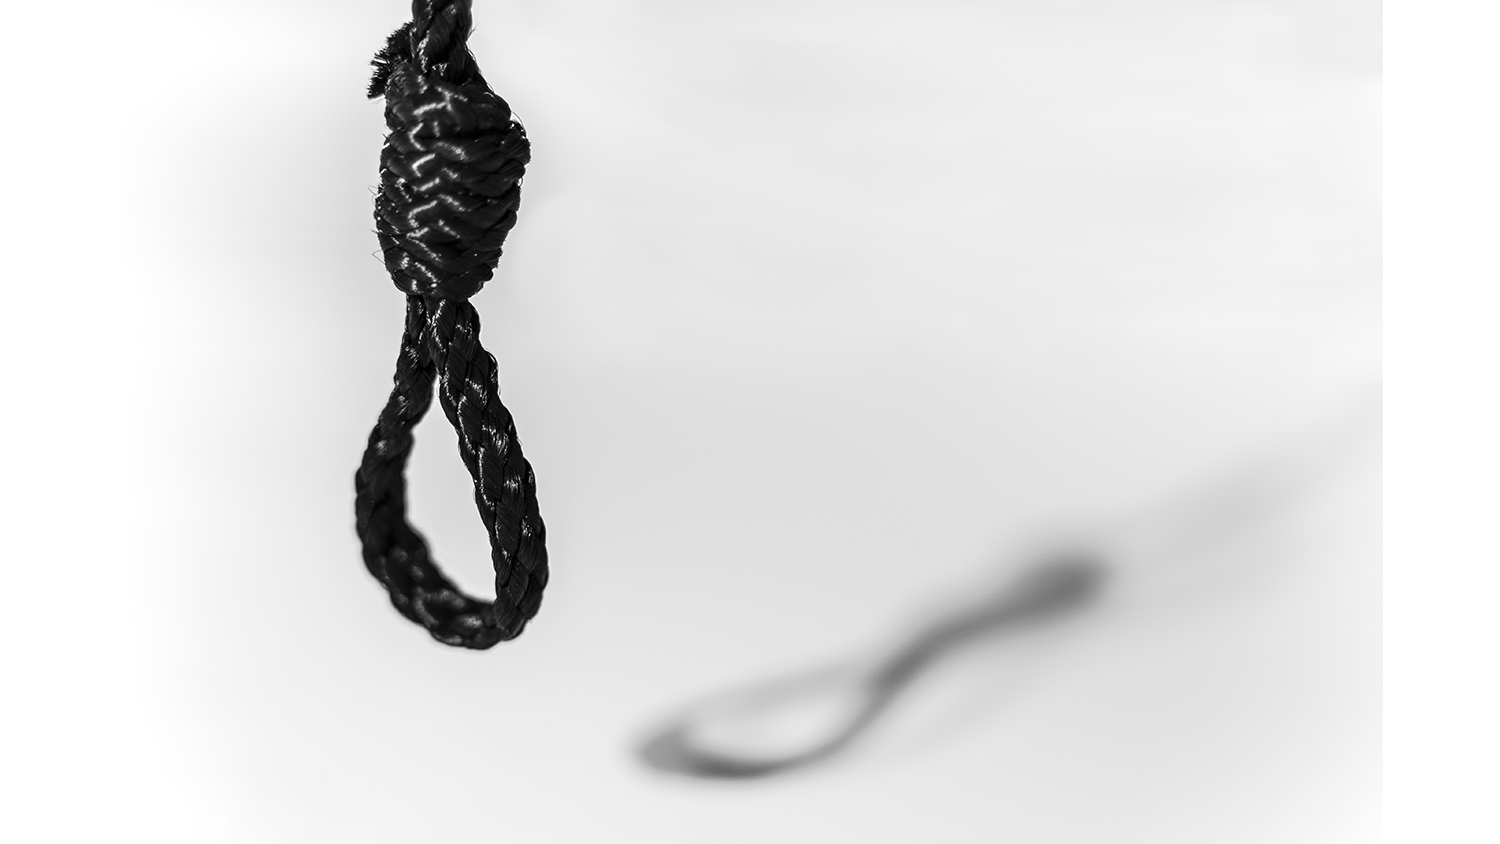 A rope with a knot at the end is suspended in the air.